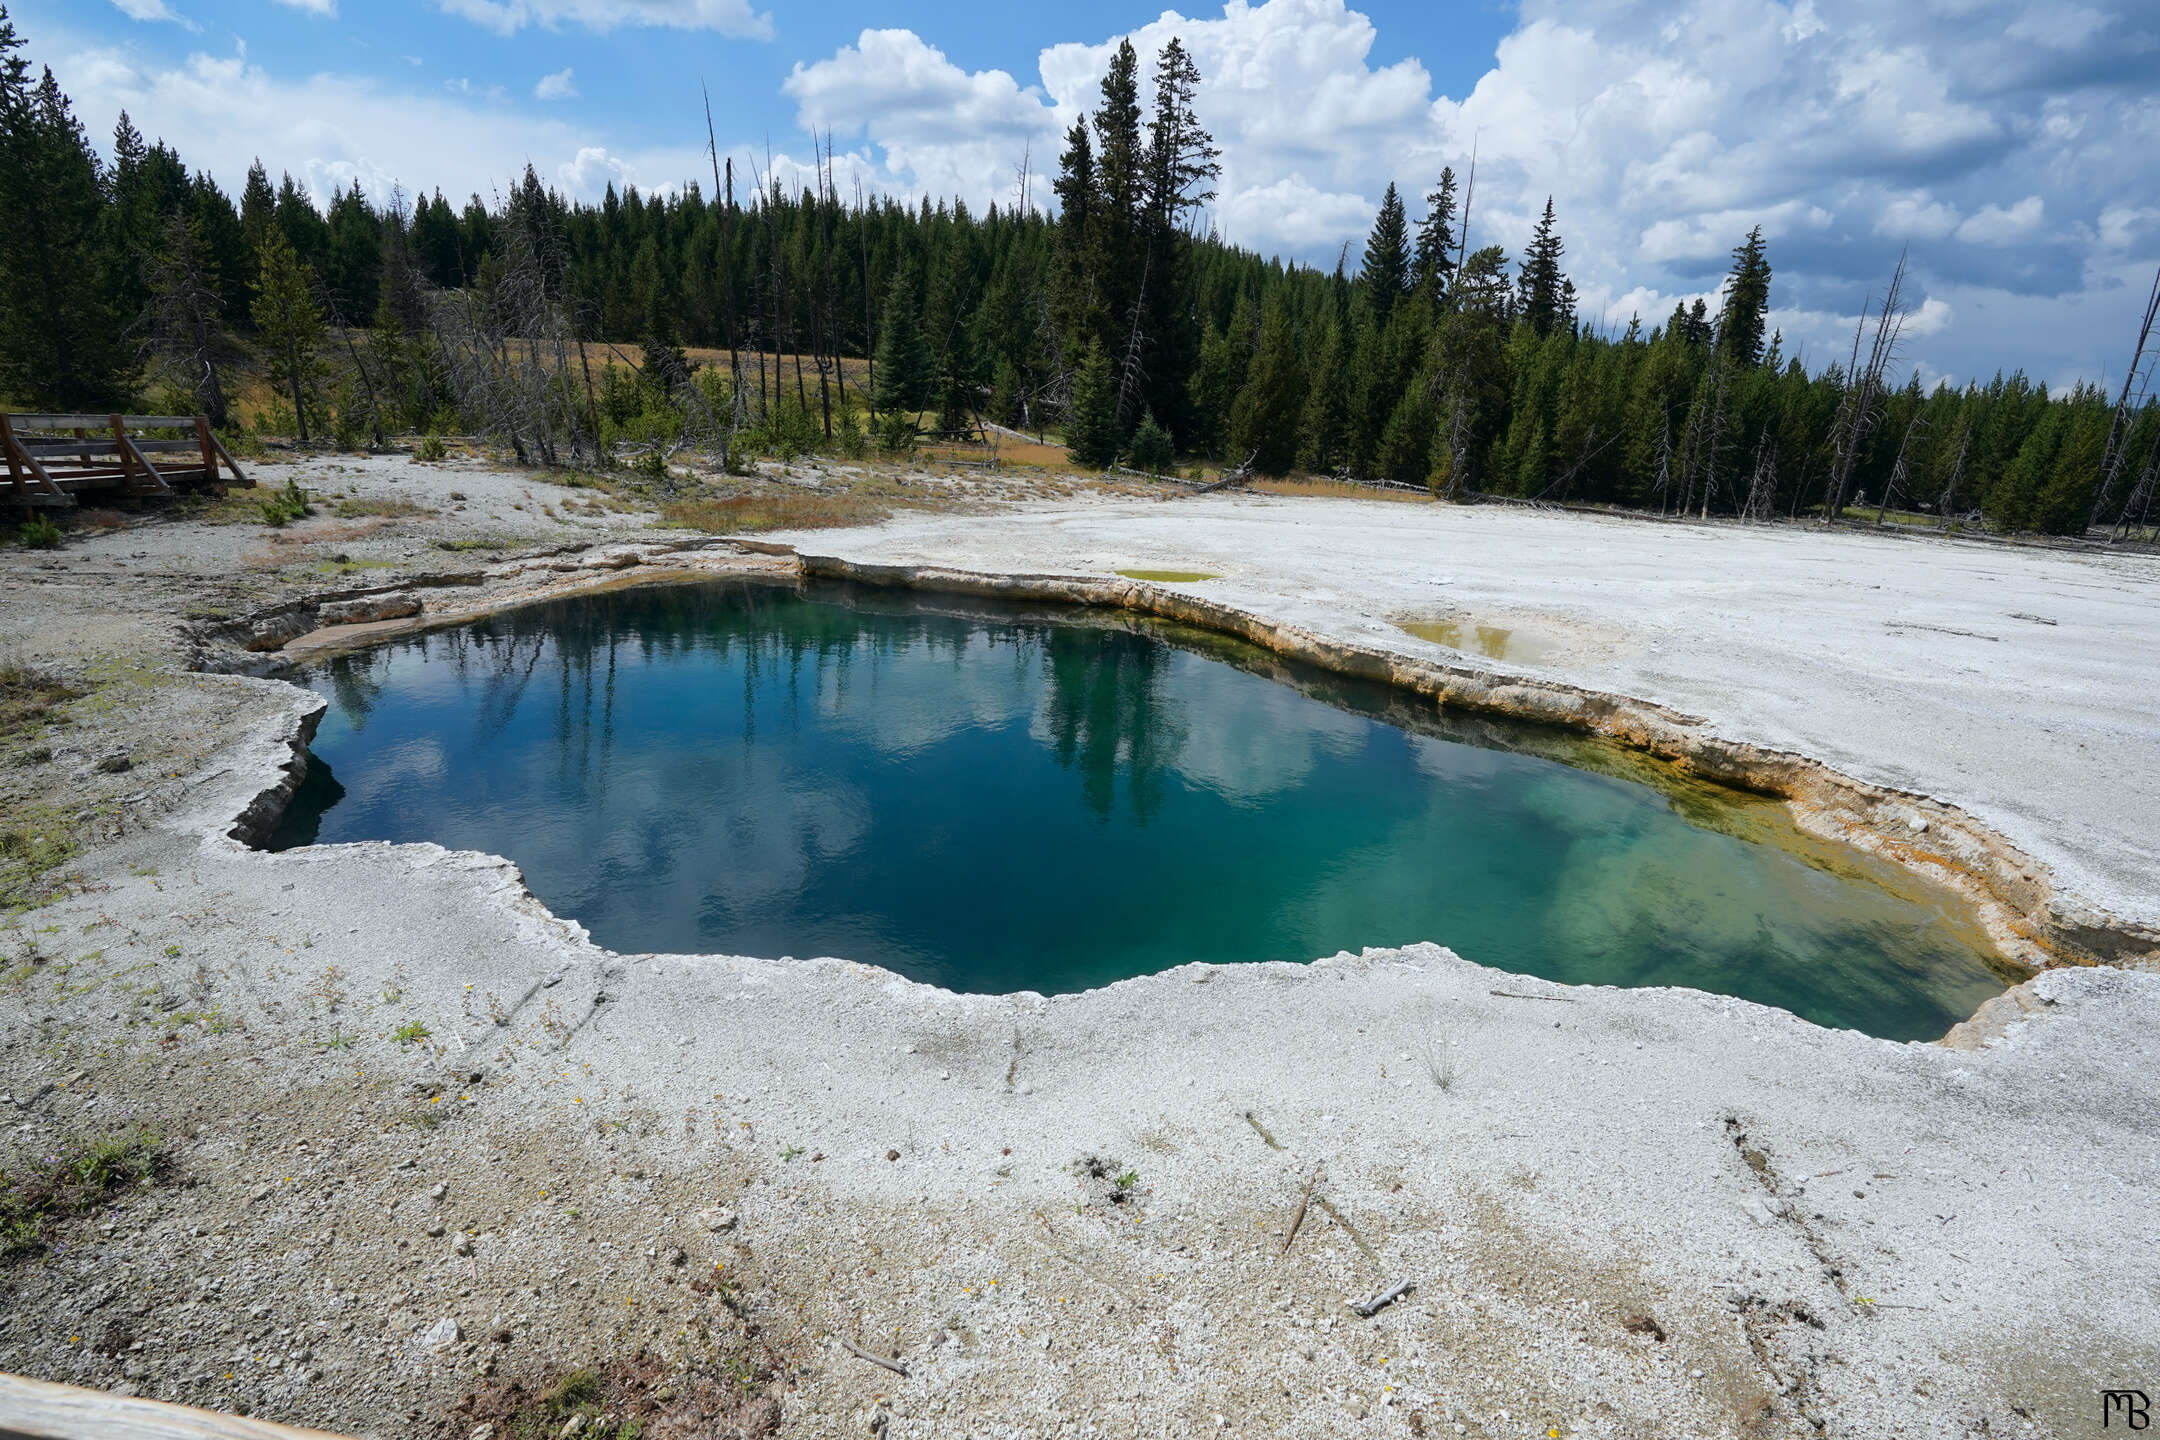 Blue and green hot spring at Yellowstone